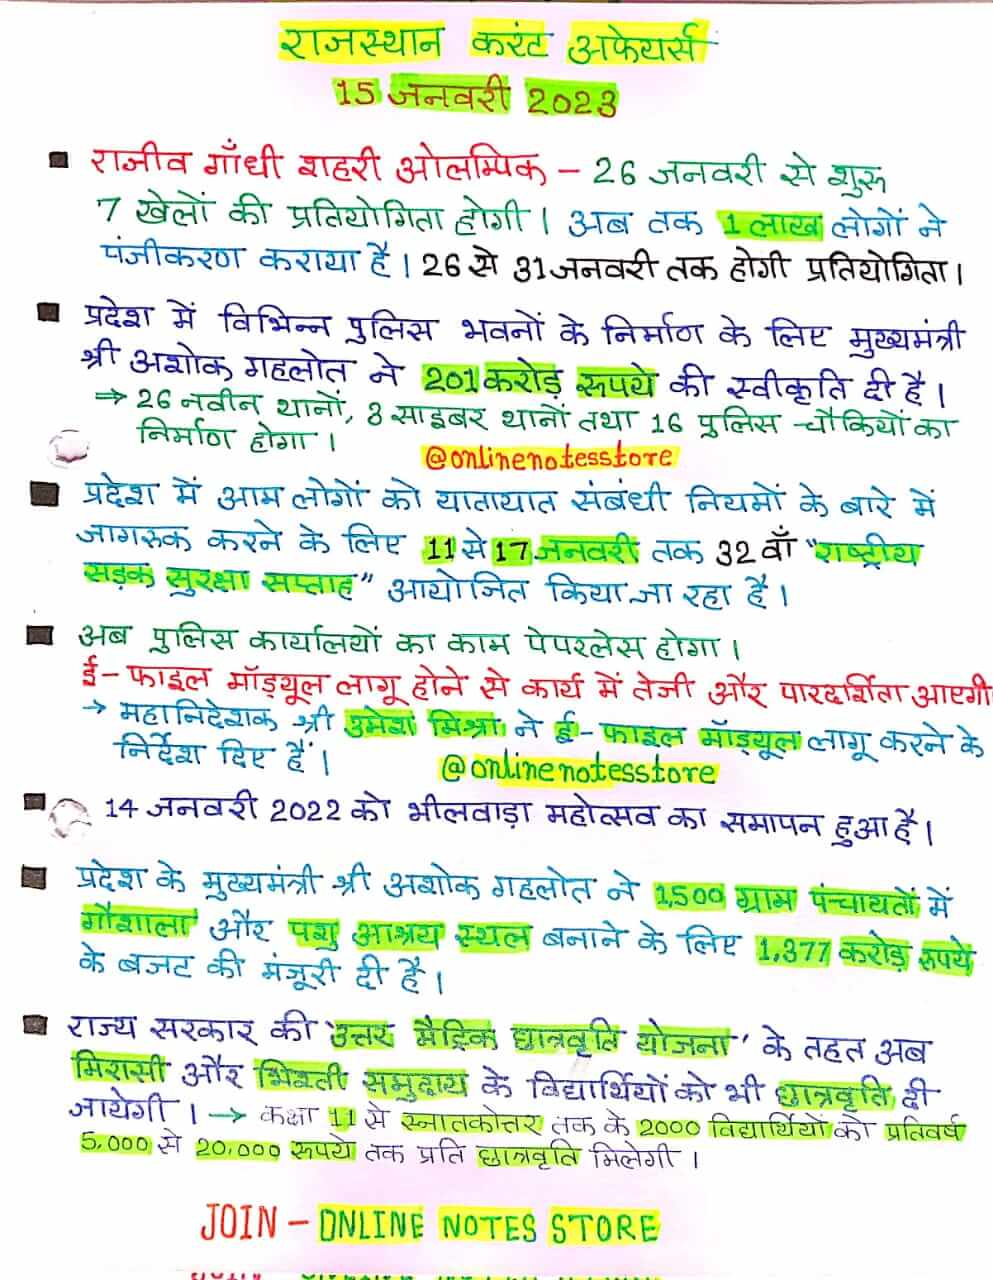 11-20 January 2023 Rajasthan Current Affairs in Hindi PDF |11-20 January 2023 करंट अफेयर्स | Rajasthan Current Affairs Quiz 11-20 January 2023 | Today Current Affairs 11-20 January 2023 | Current Affairs India - 11-20 January 2023 | Current Affairs in Hindi | Today Current Affairs Questions PDF | Current Affairs - Online Notes Store | Rajasthan Current Affairs - 2023